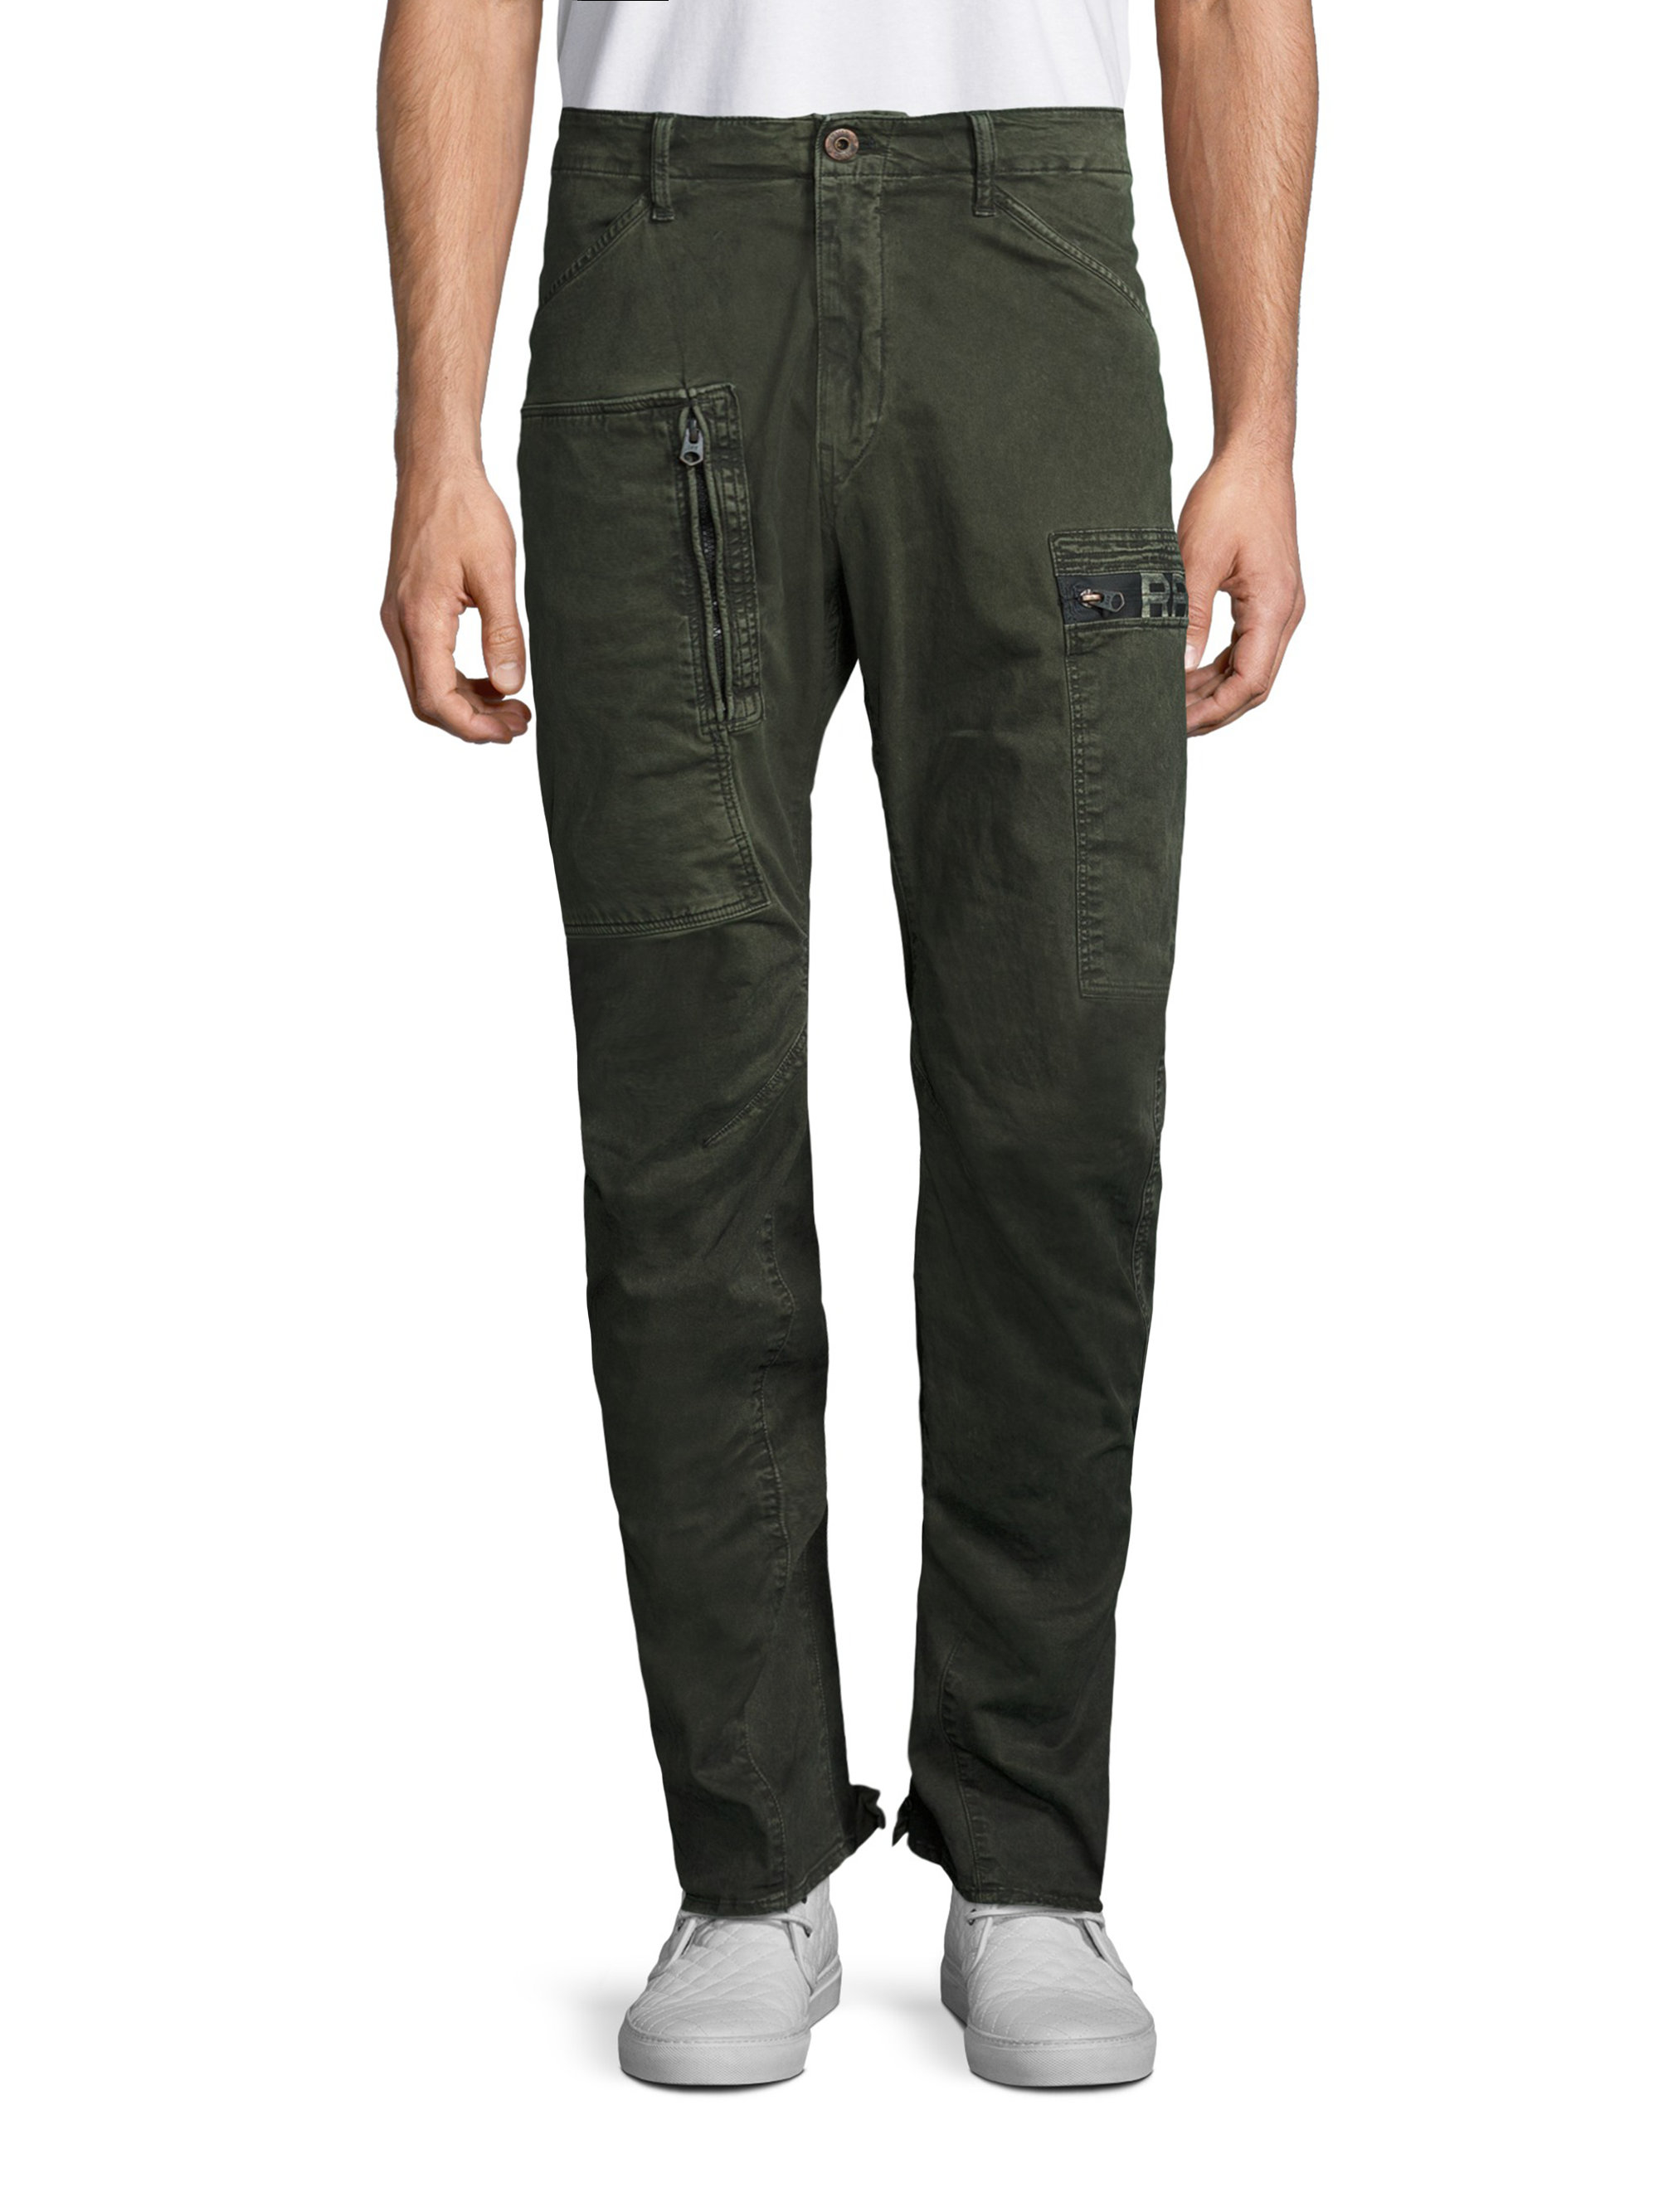 Lyst - G-Star Raw Powell 3d Slim Fit Jeans for Men